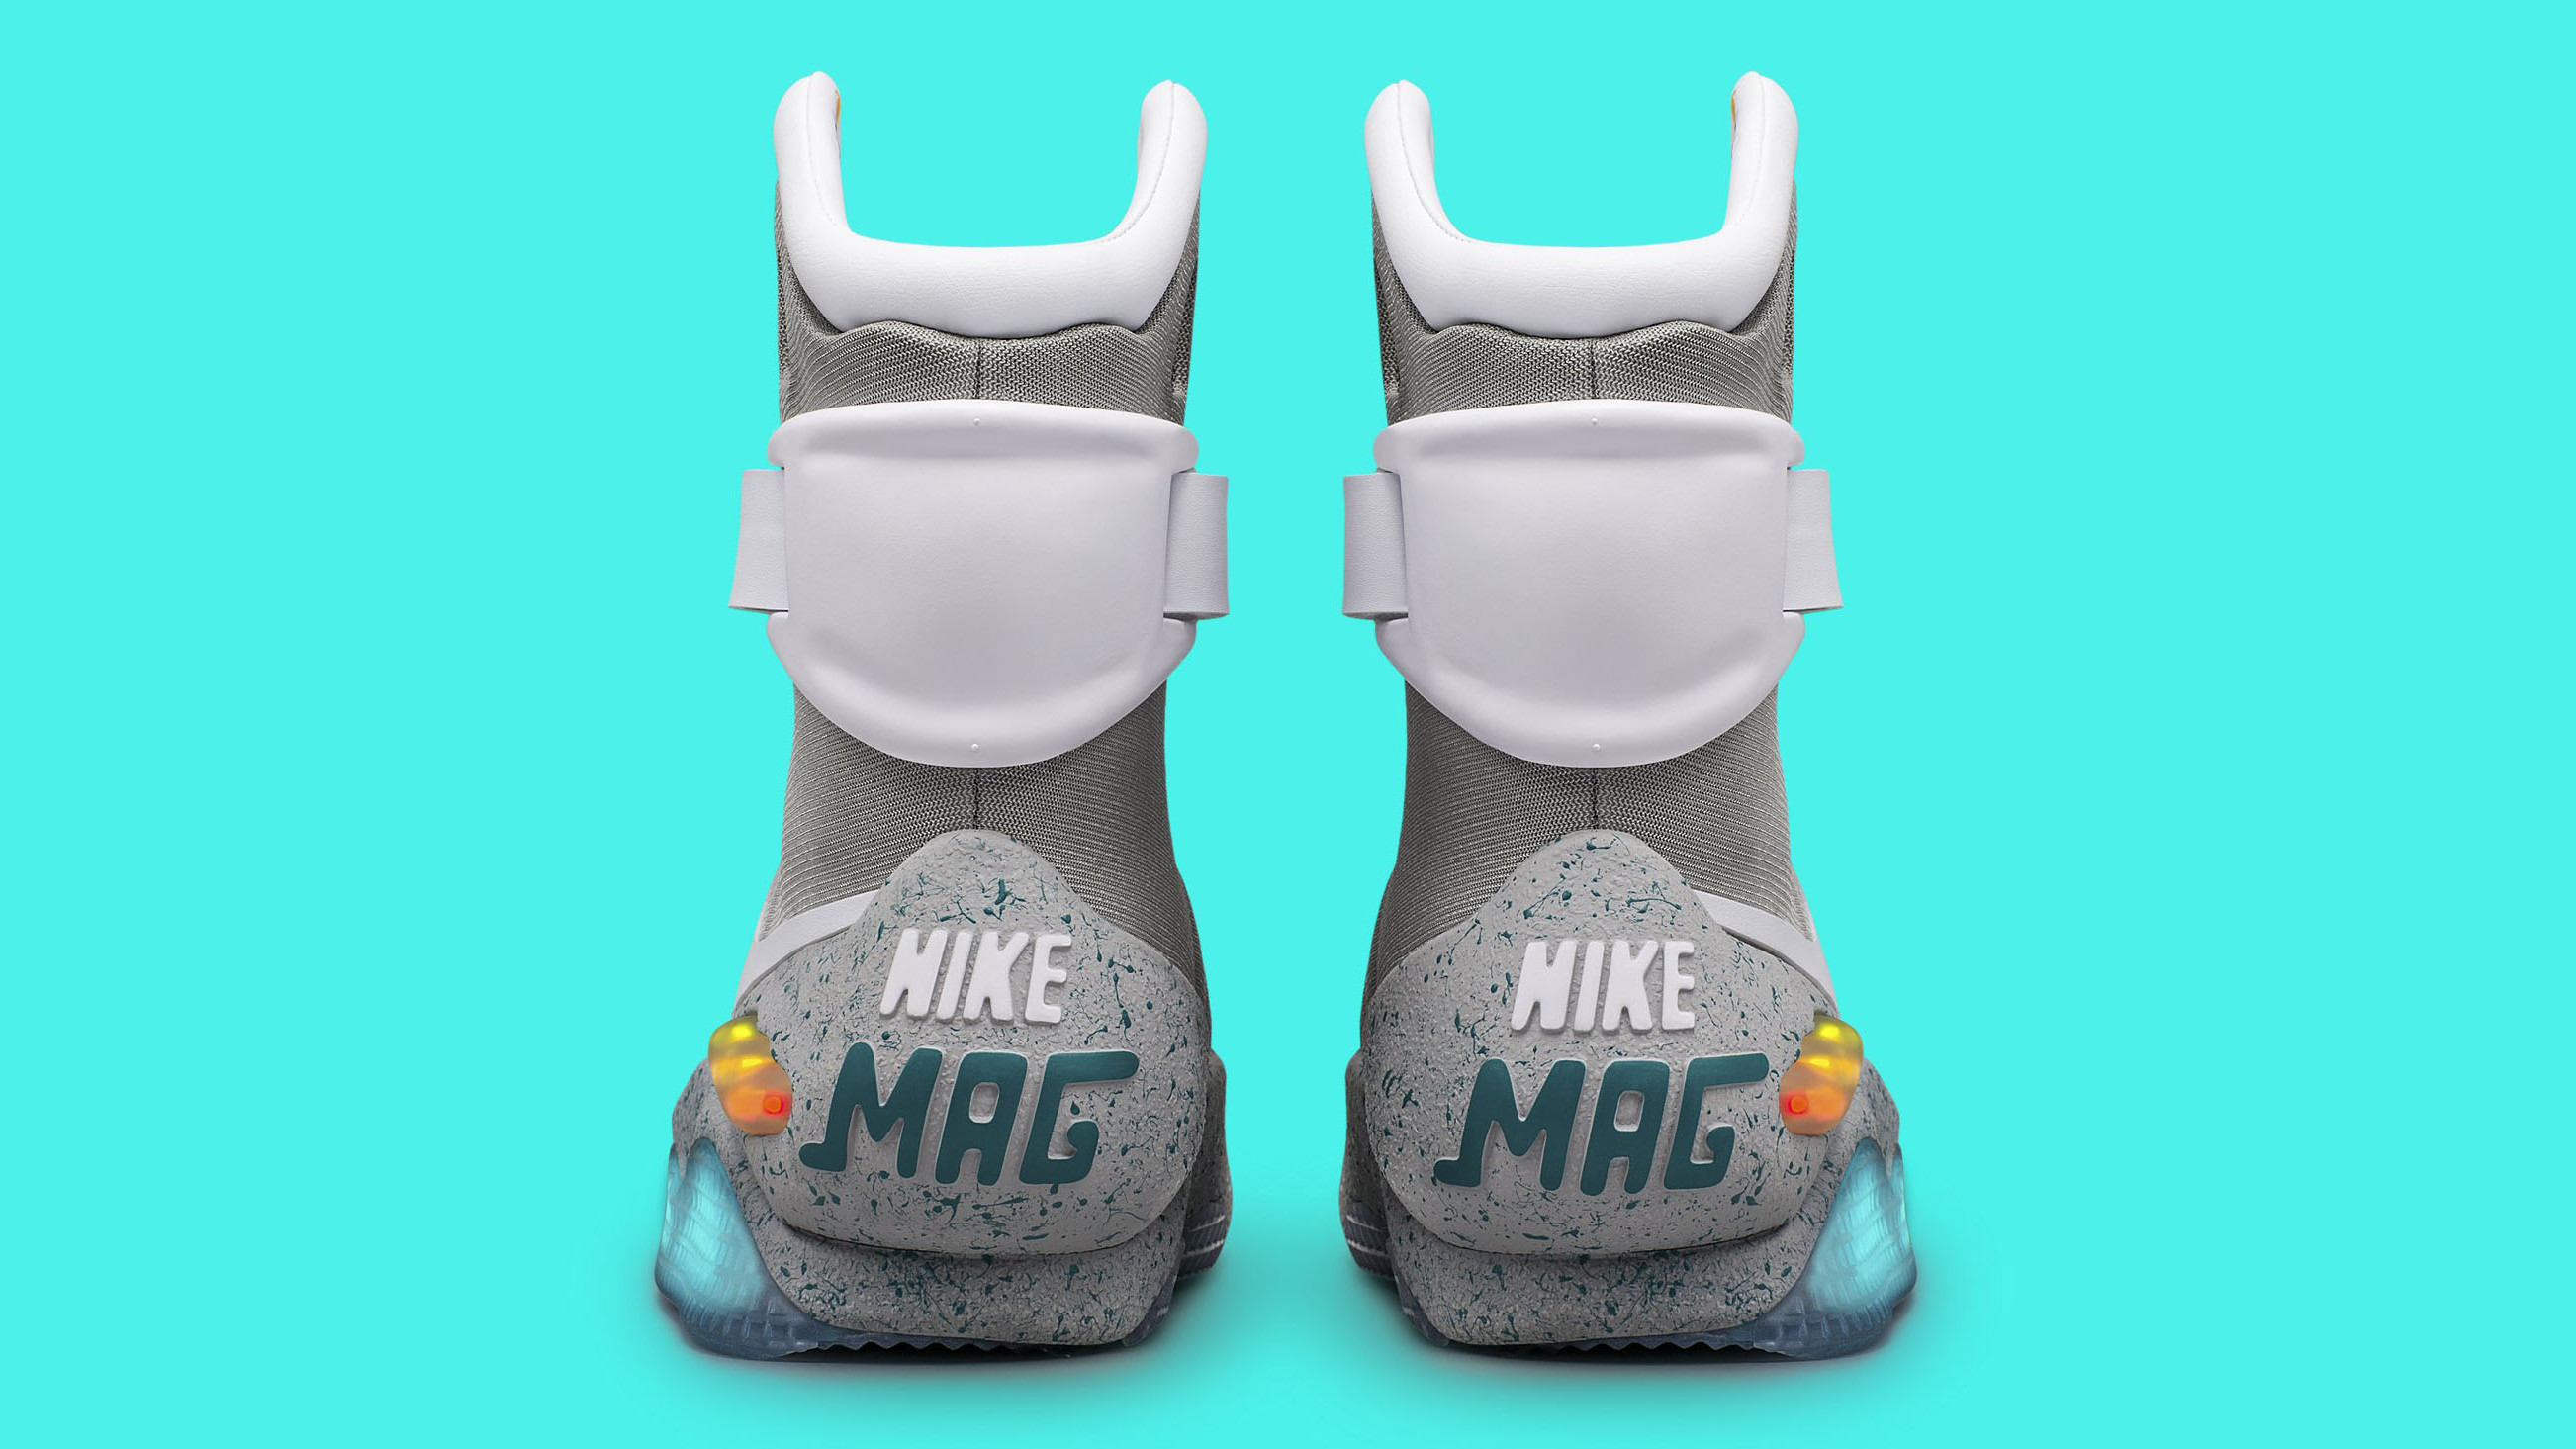 Bont Geleerde Vervolgen How Much Are Nike Mag Back to the Future Sneakers | Sole Collector